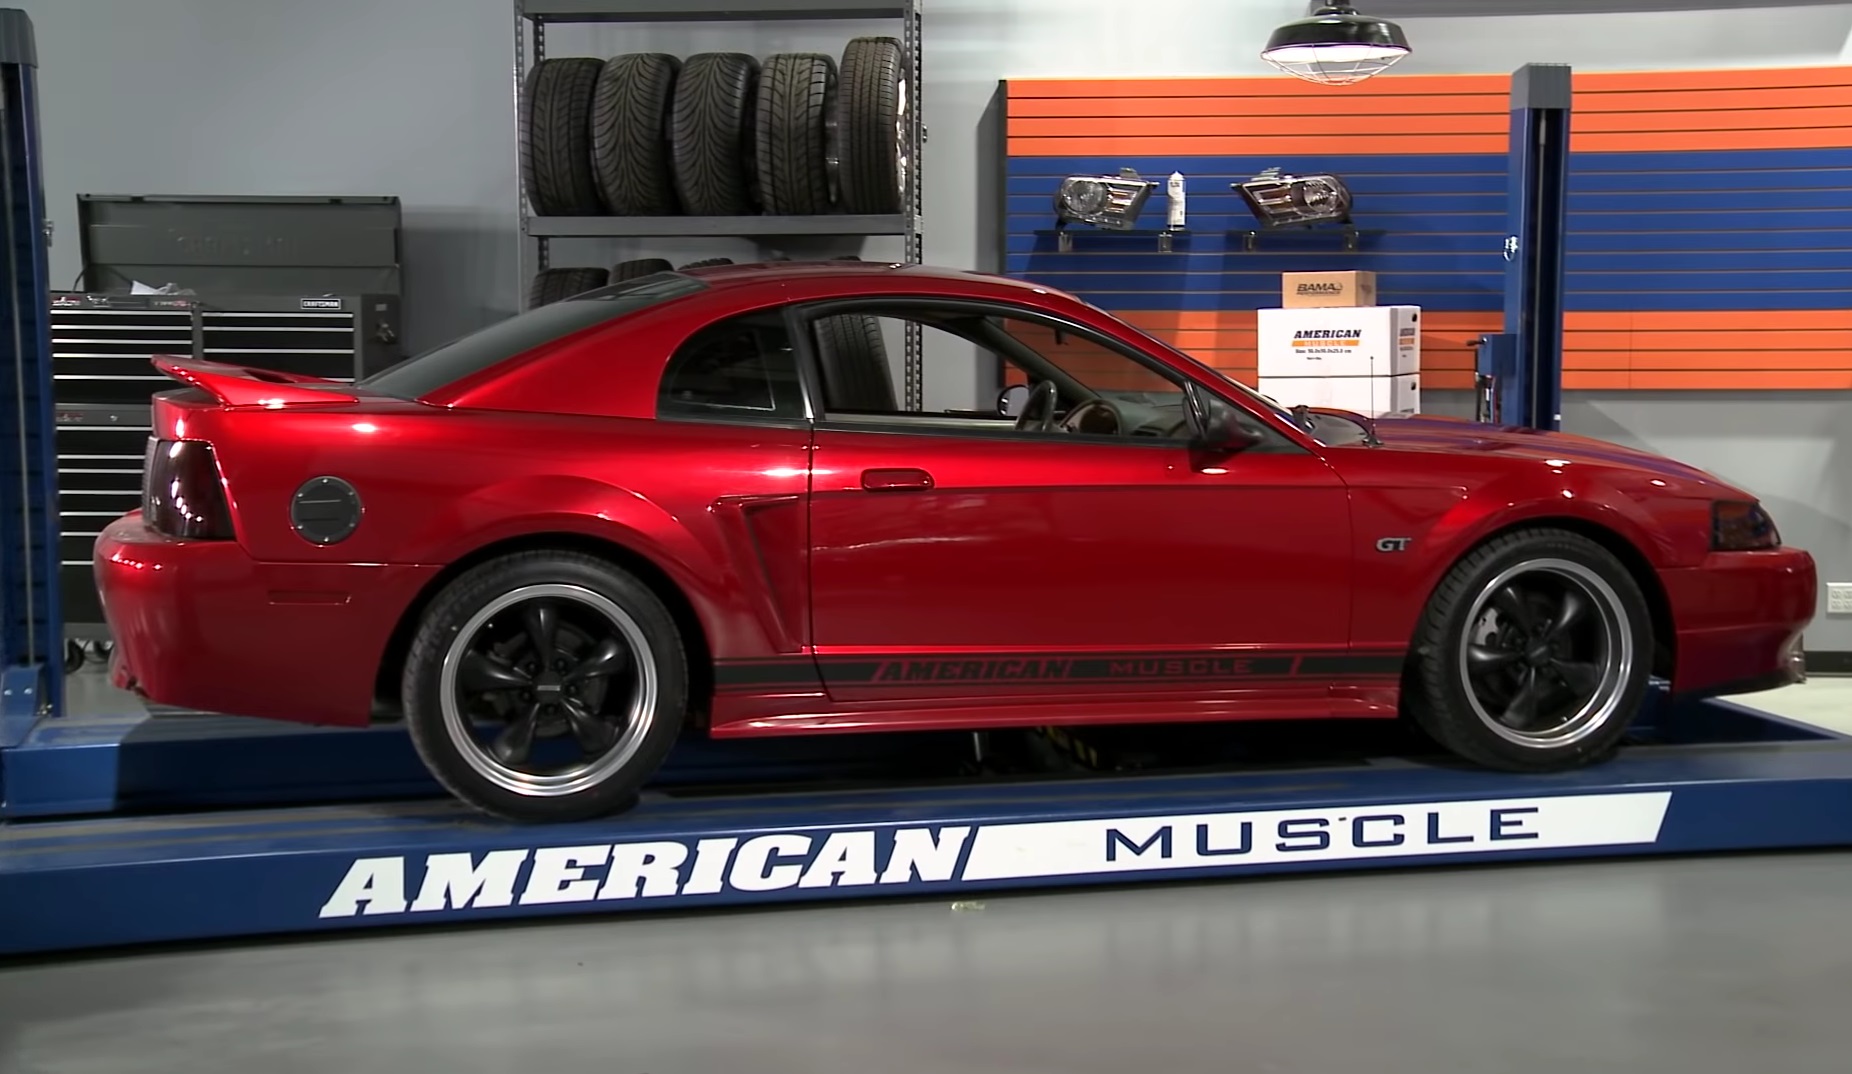 Video: Check Out This Incredible 2000 Ford Mustang GT Throwback Build